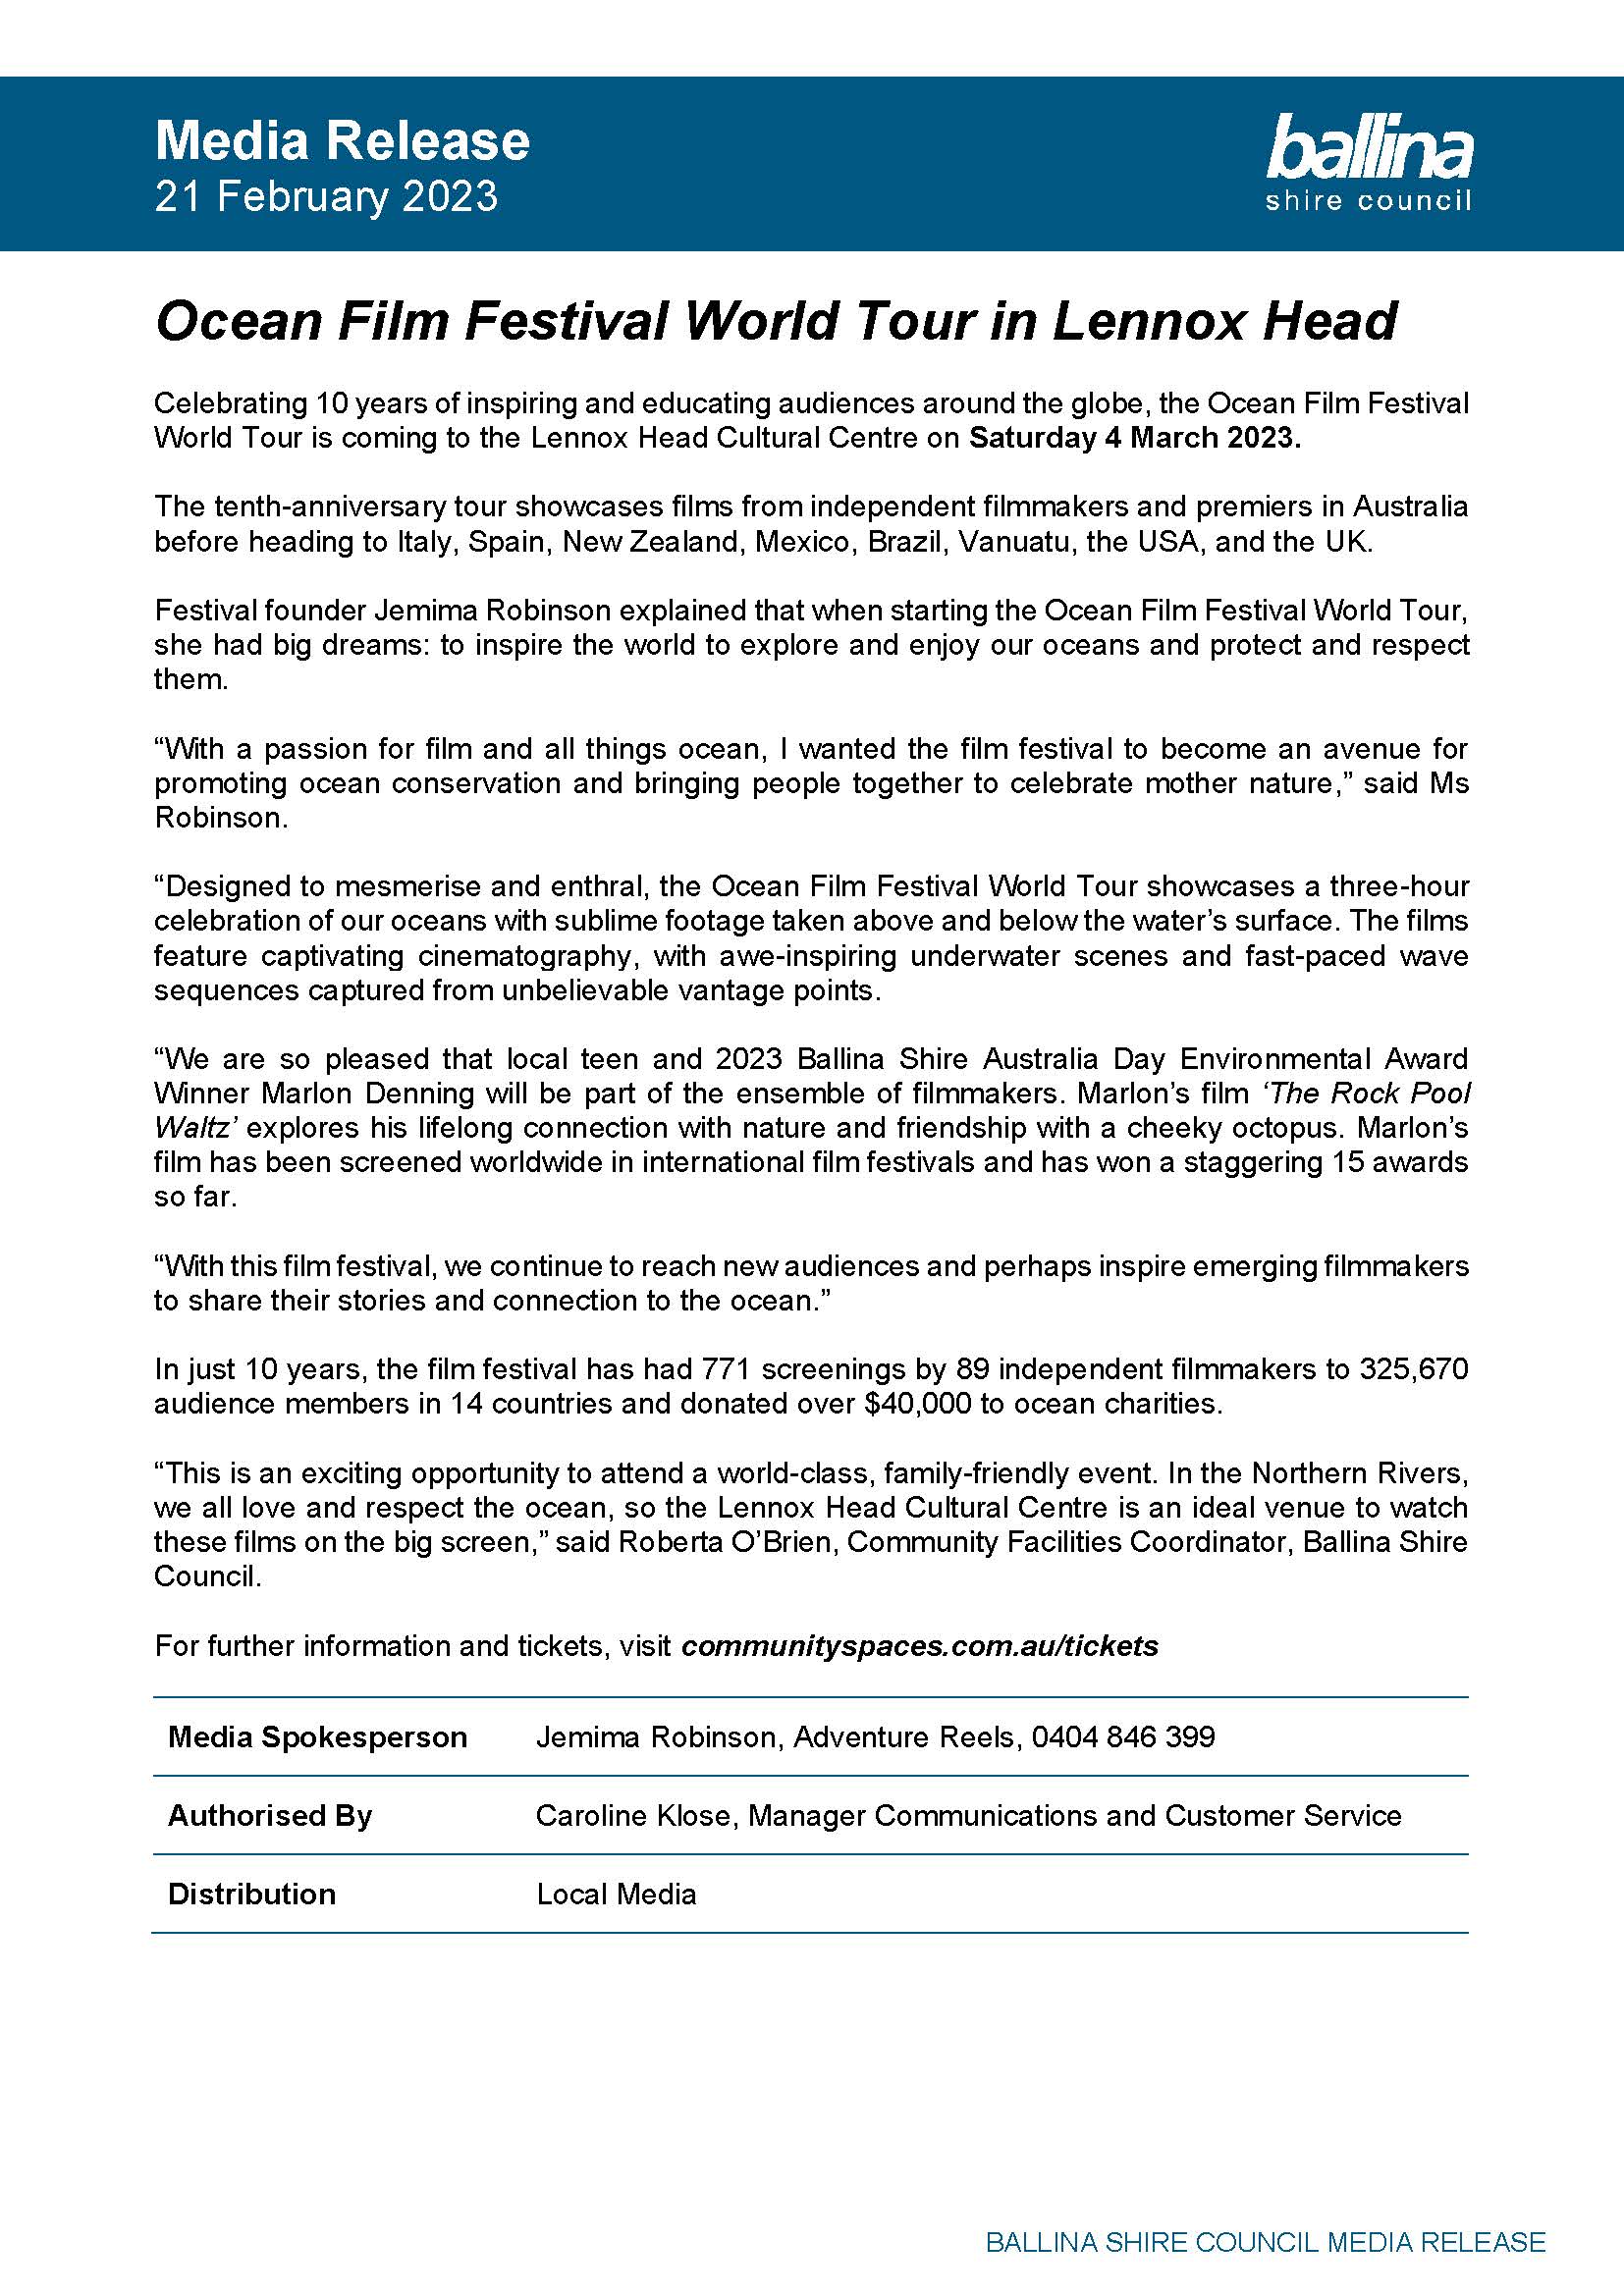 Media Release Ocean Film Festival World Tour March 2023_Page_1